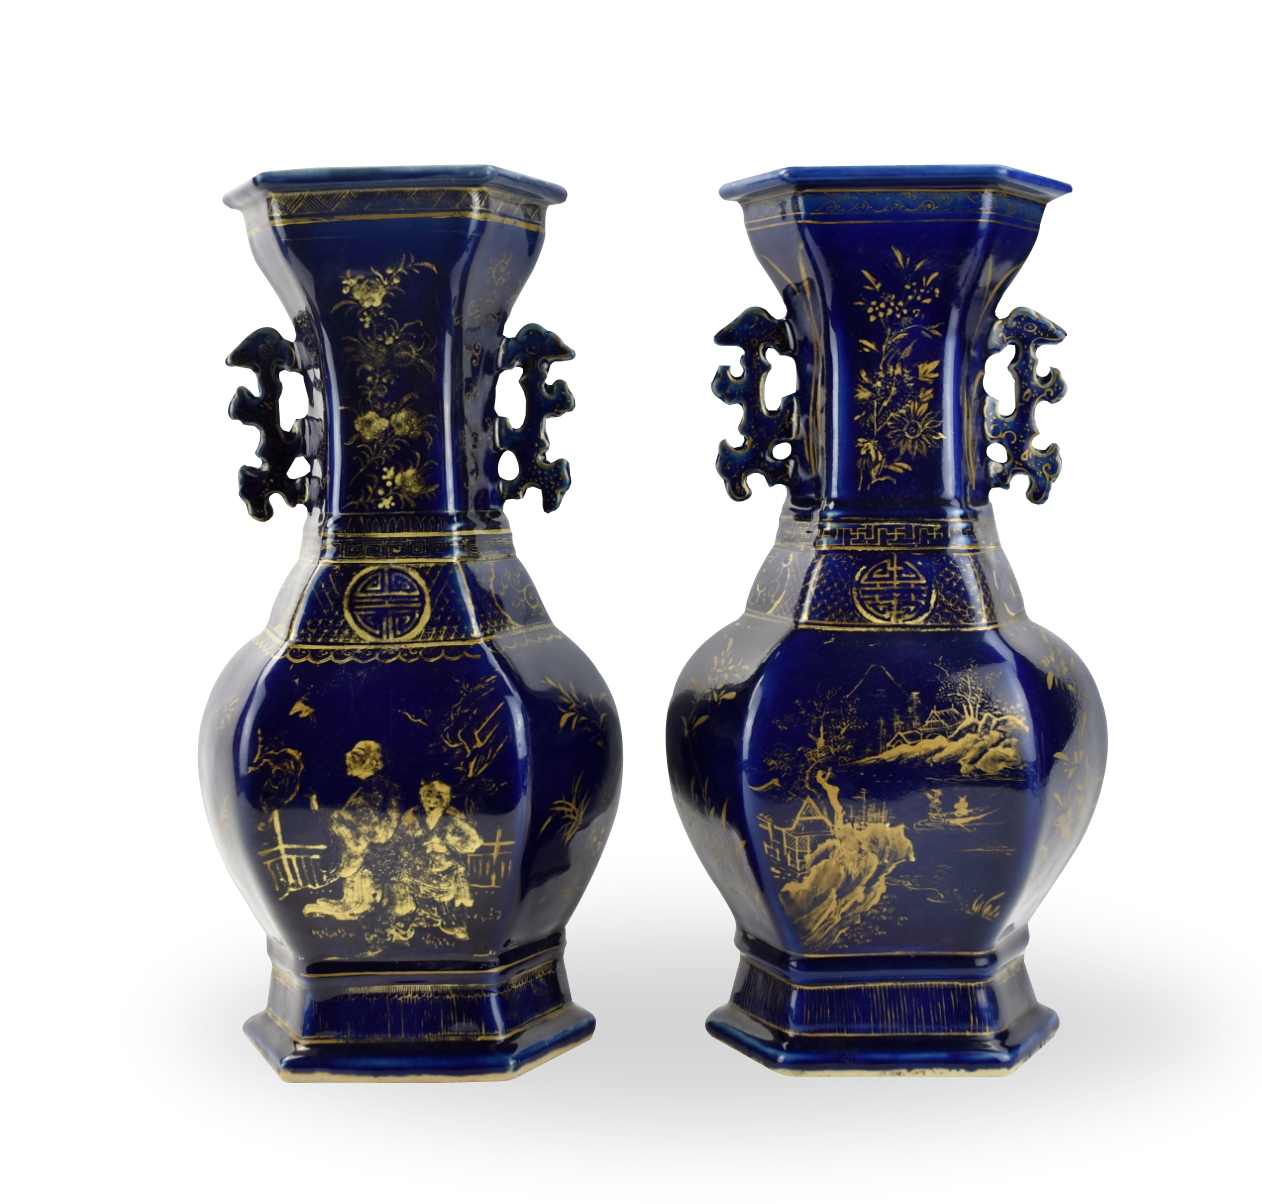 PAIR OF LARGE CHINESE GILT BLUE 33924c